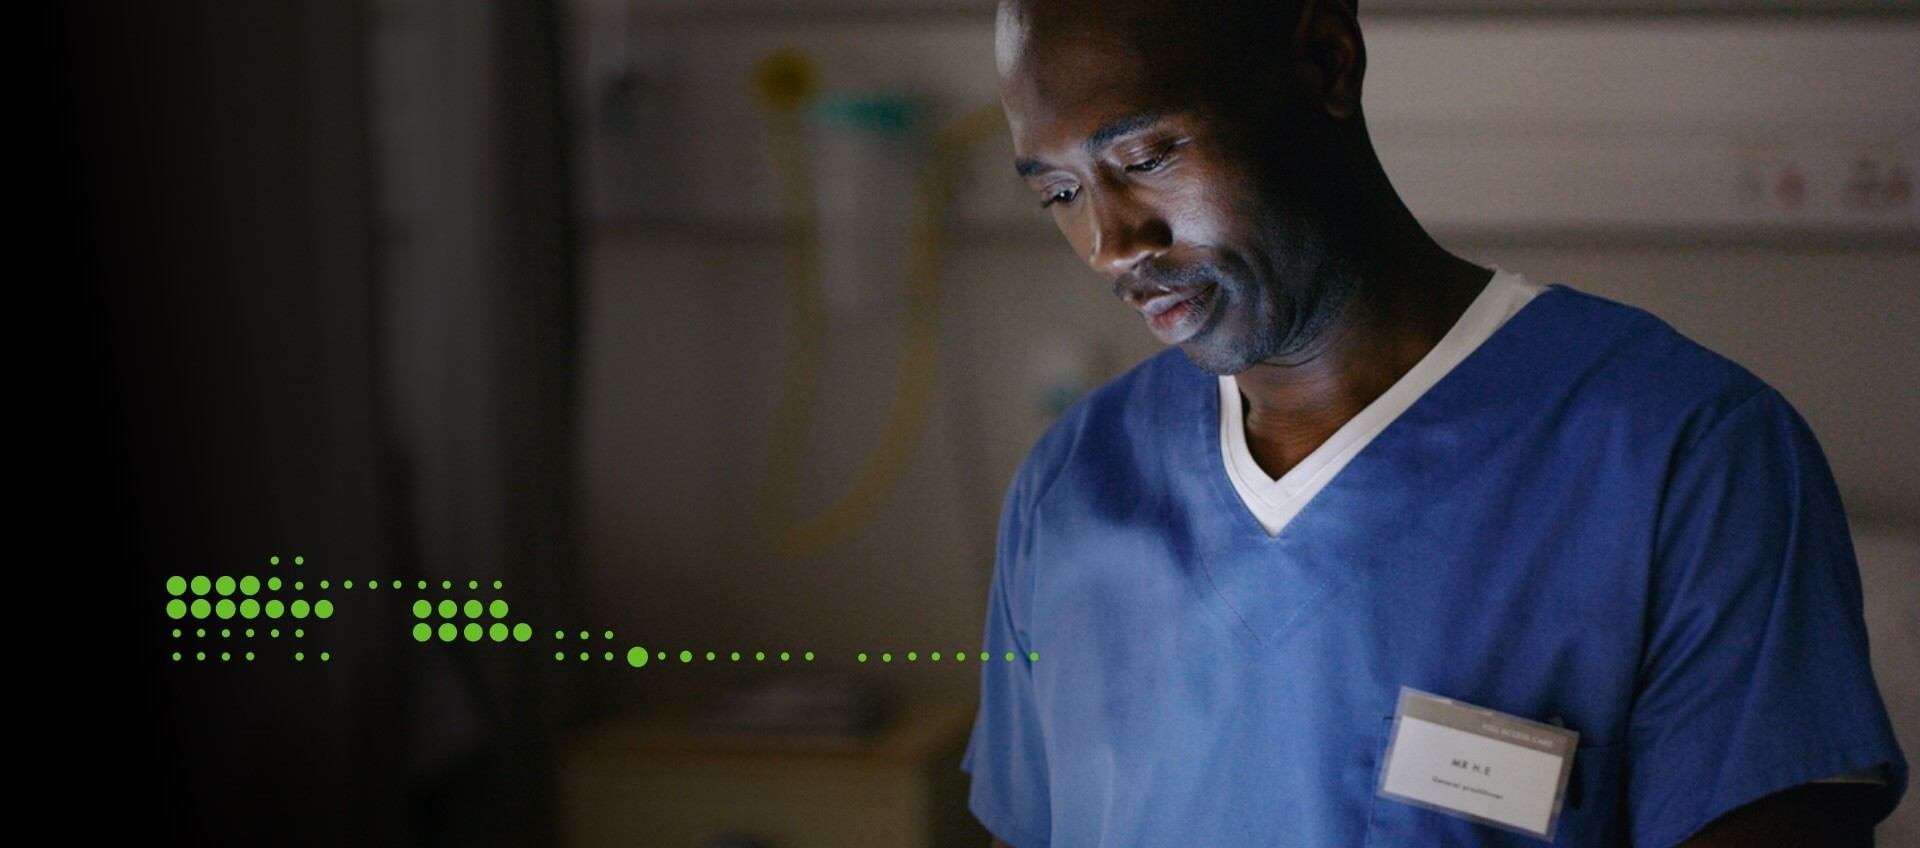 DIMENSION DATA OFFERS FREE INCIDENT RESPONSE IR FOR CYBERSECURITY ATTACKS AIMED AT HOSPITALS DURING COVID19